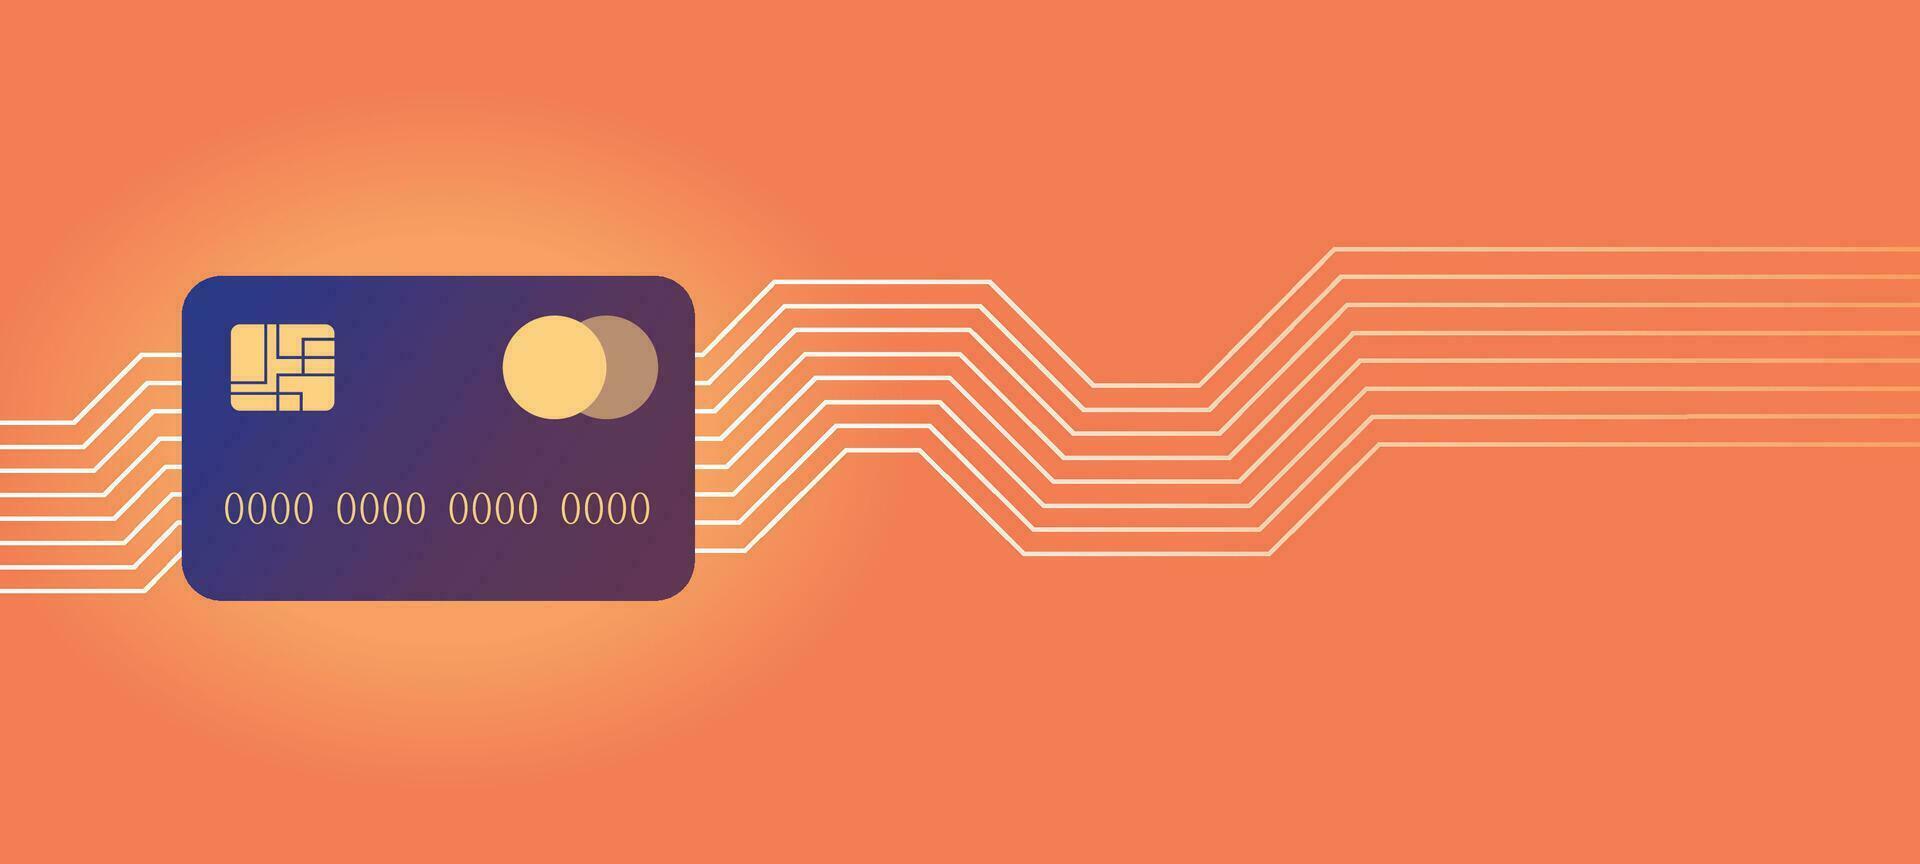 Glow credit card background vector